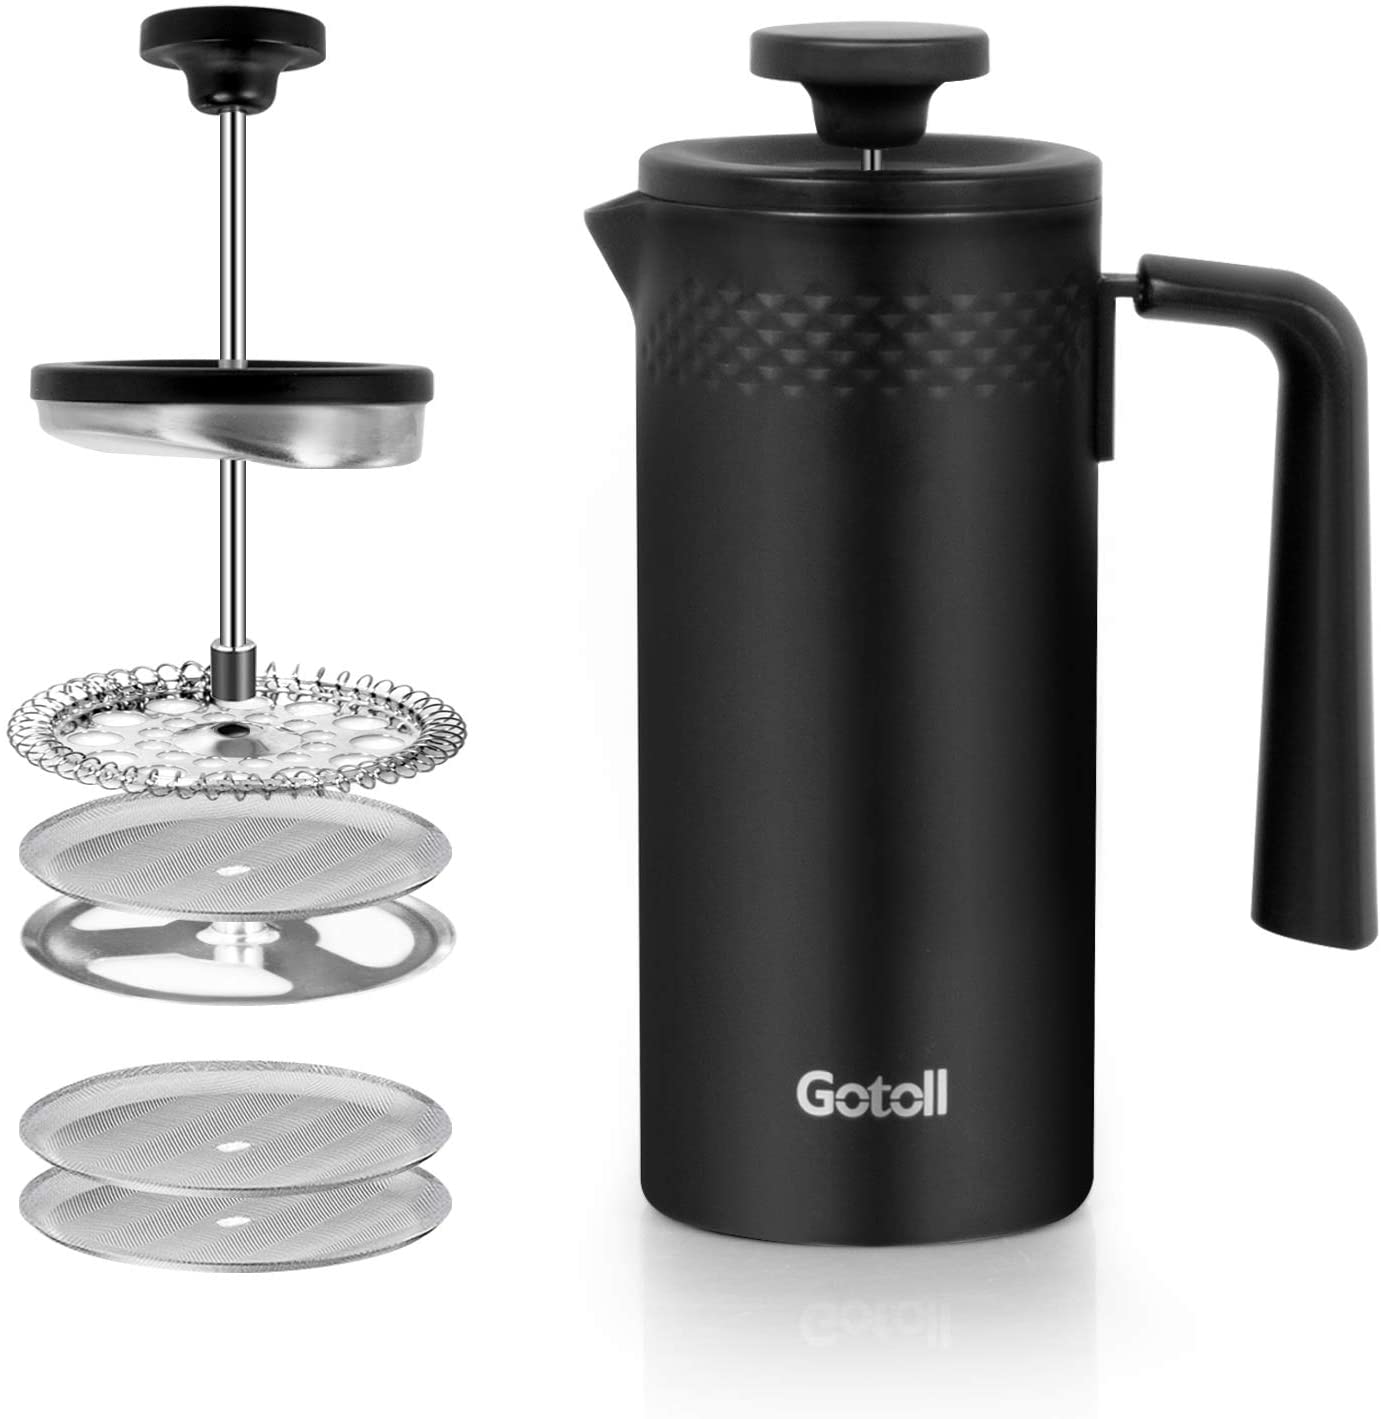 Gotoll Stainless Steel Coffee Maker, French Press 0.35 Litres, Coffee Press with 3 Replacement Strainers, Coffee Jug for 3 Cups - Black